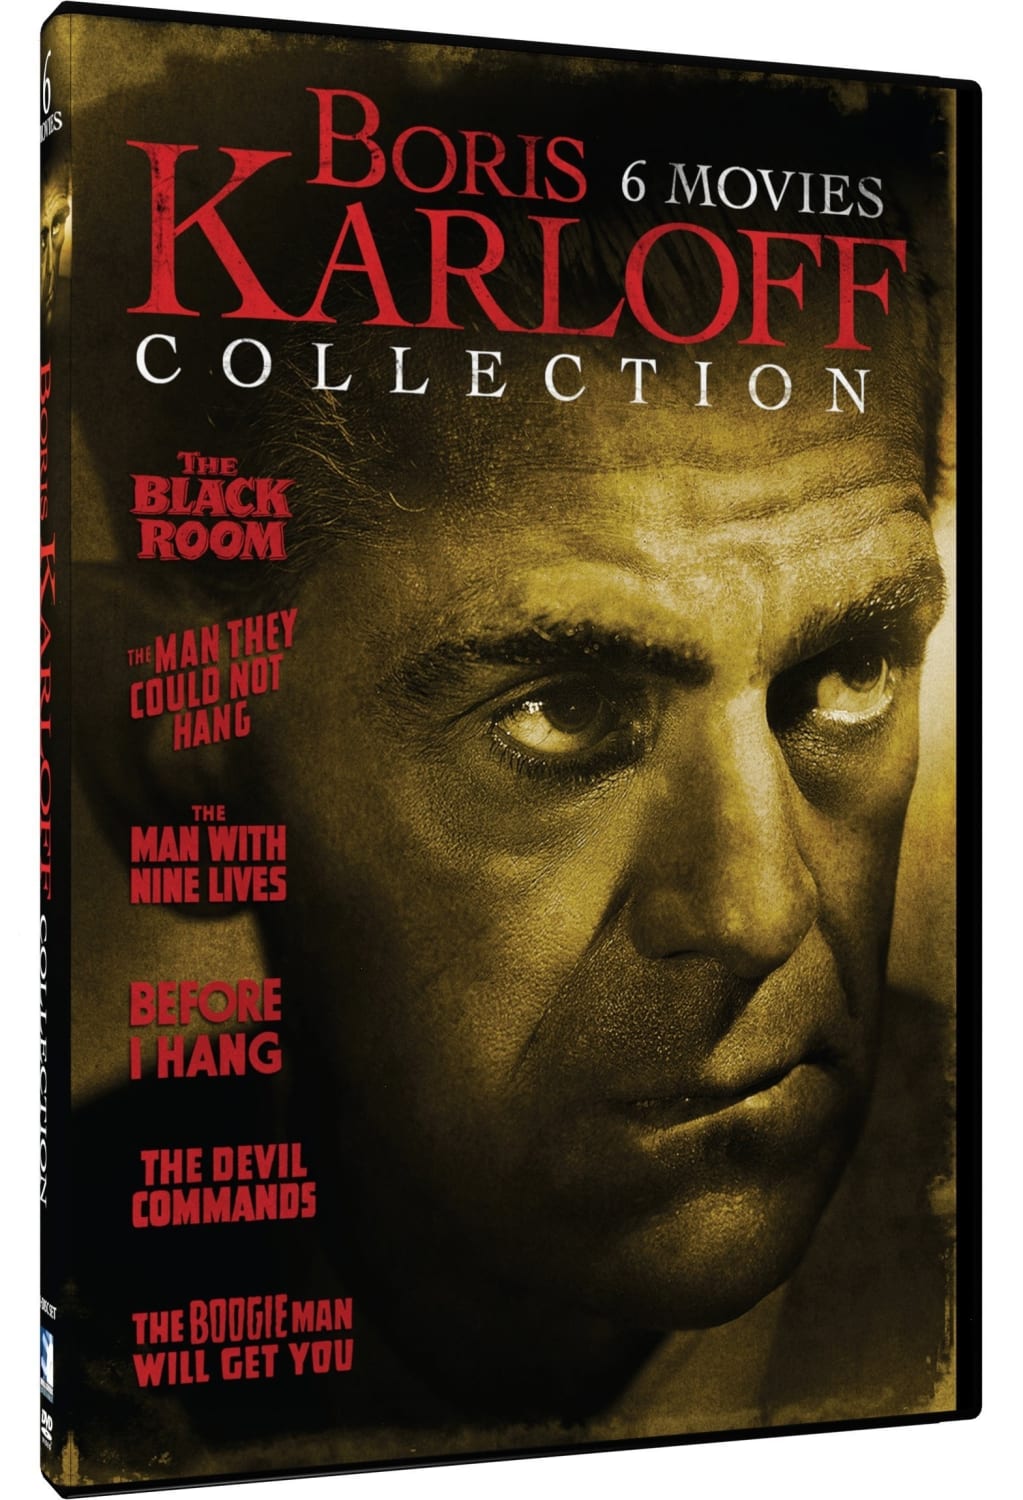 Boris Karloff Collection – The Black Room / The Man They Could Not Hang / The Man With Nine Lives / Before I Hang / The Devil Commands / The Boogie Man Will Get You (DVD) on MovieShack